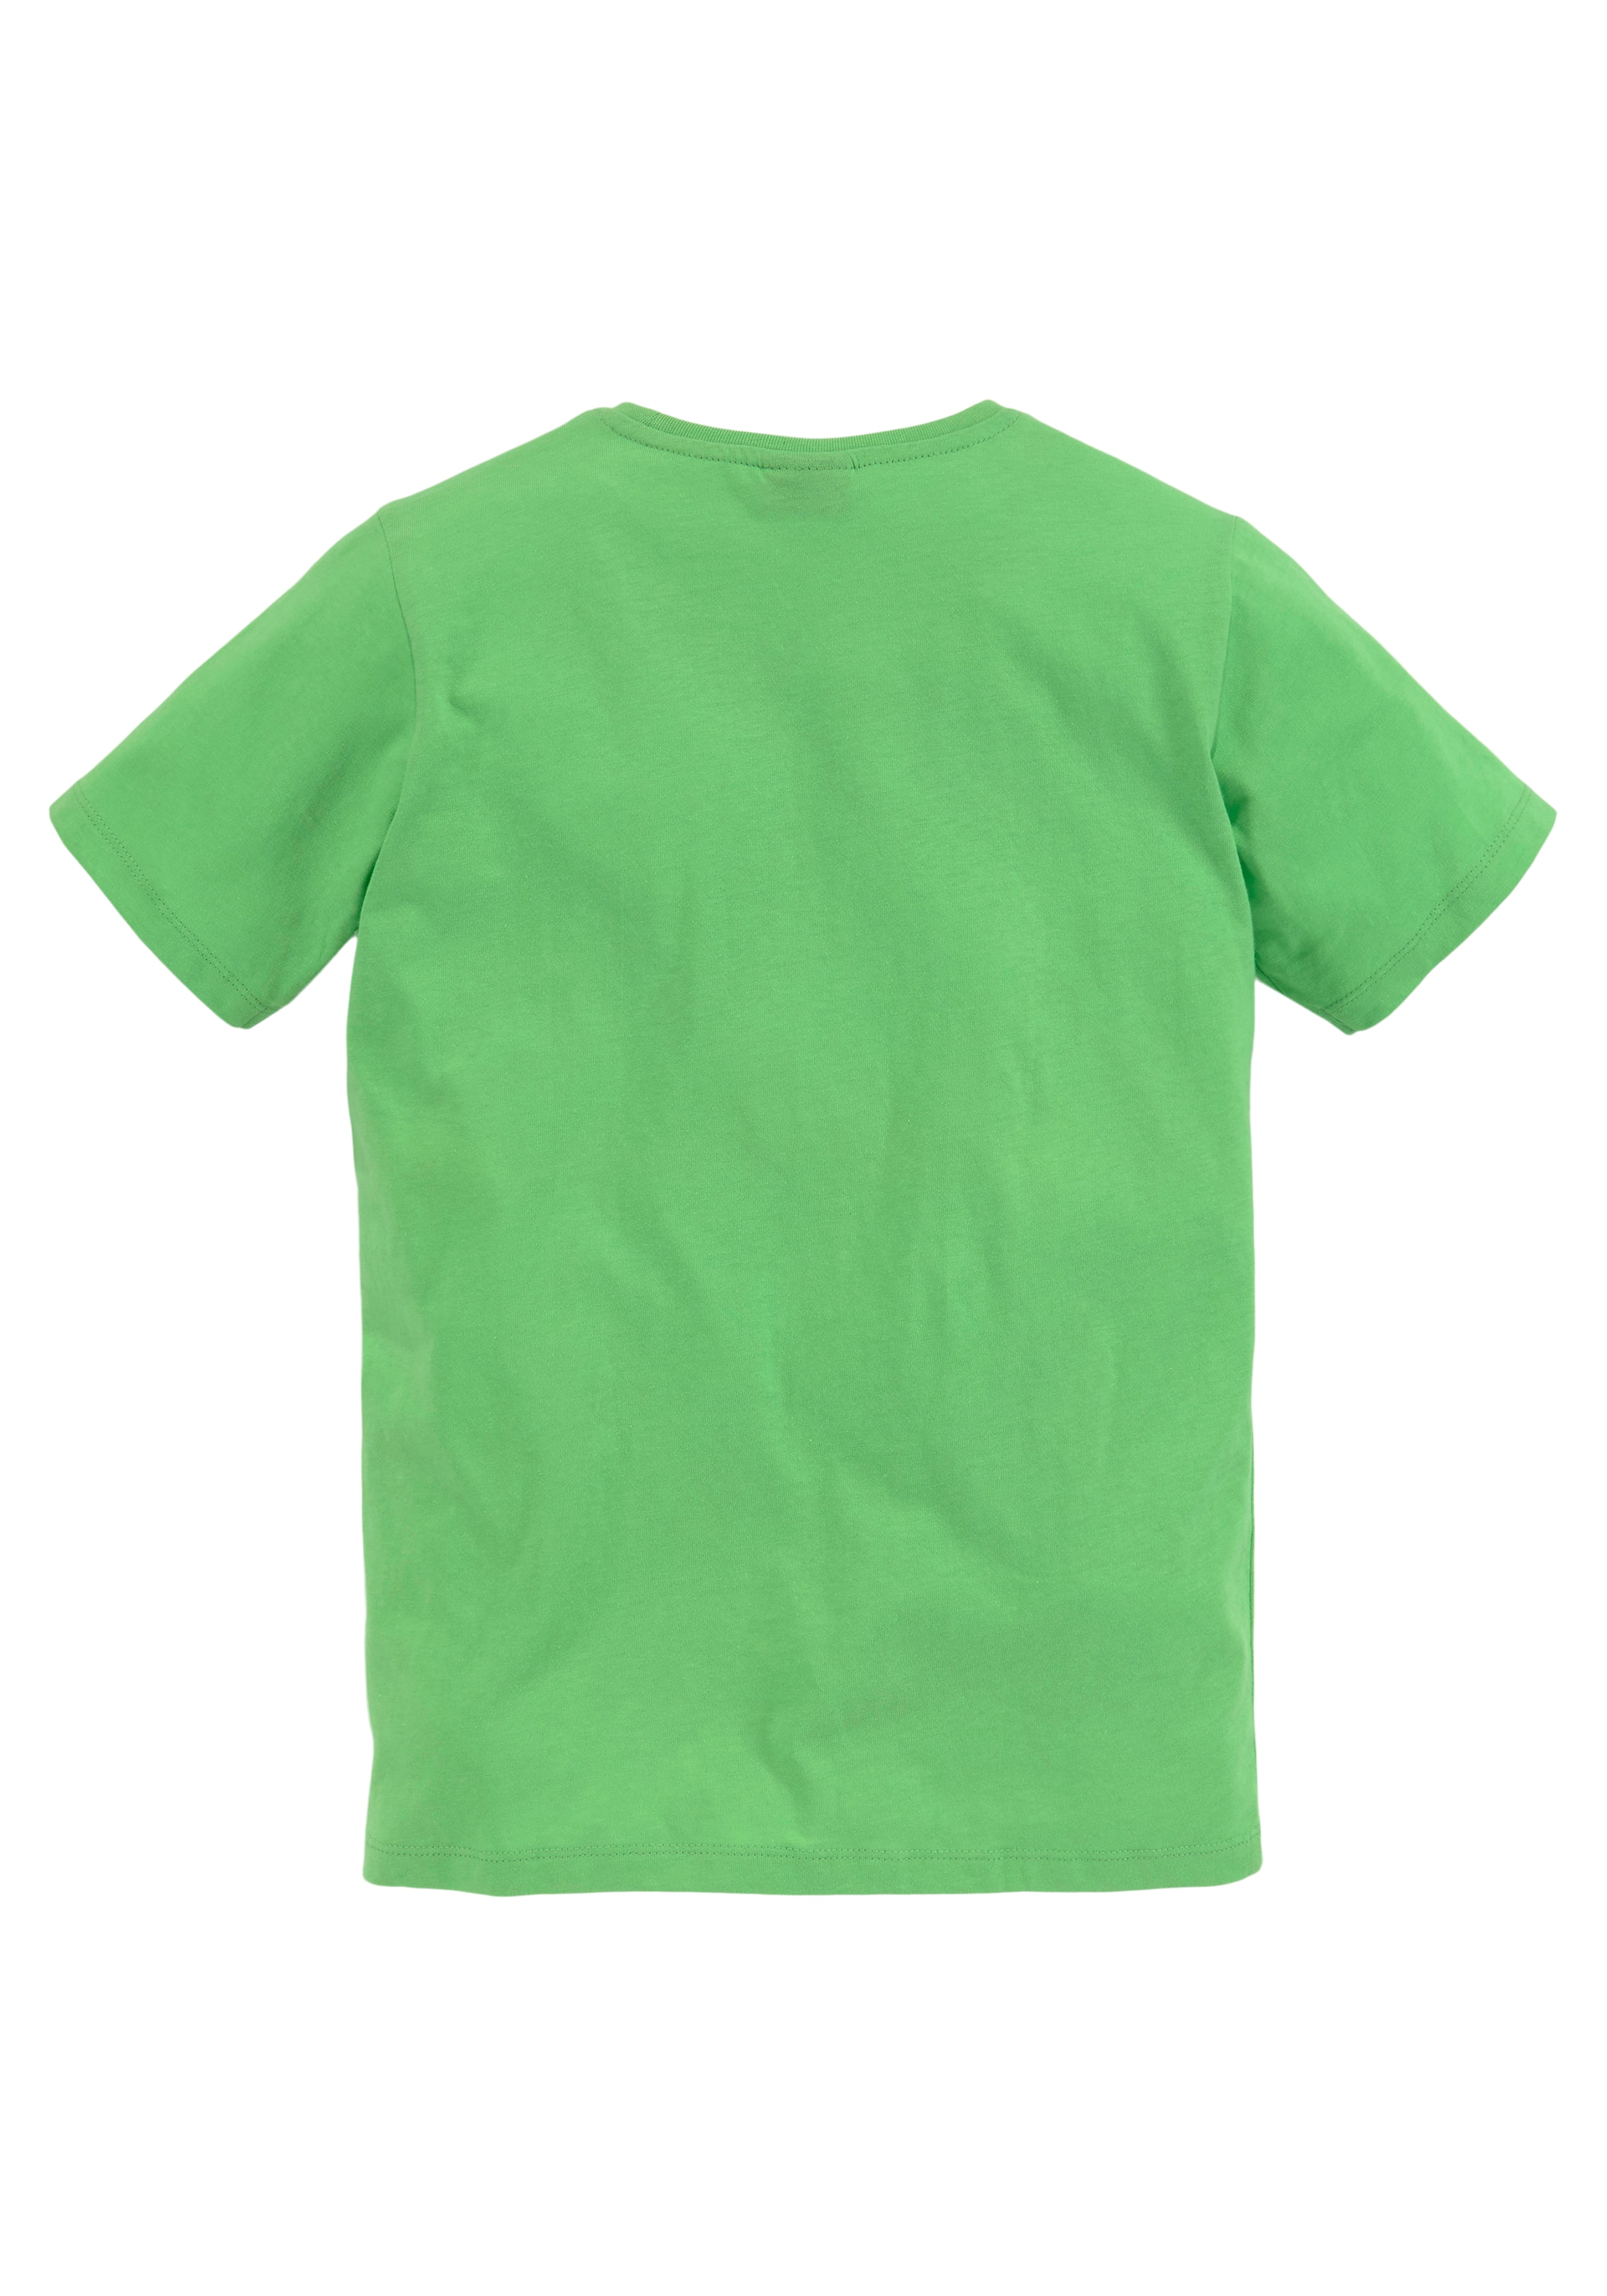 KIDSWORLD T-Shirt online kaufen »YOUR RULES GAMES« YOUR